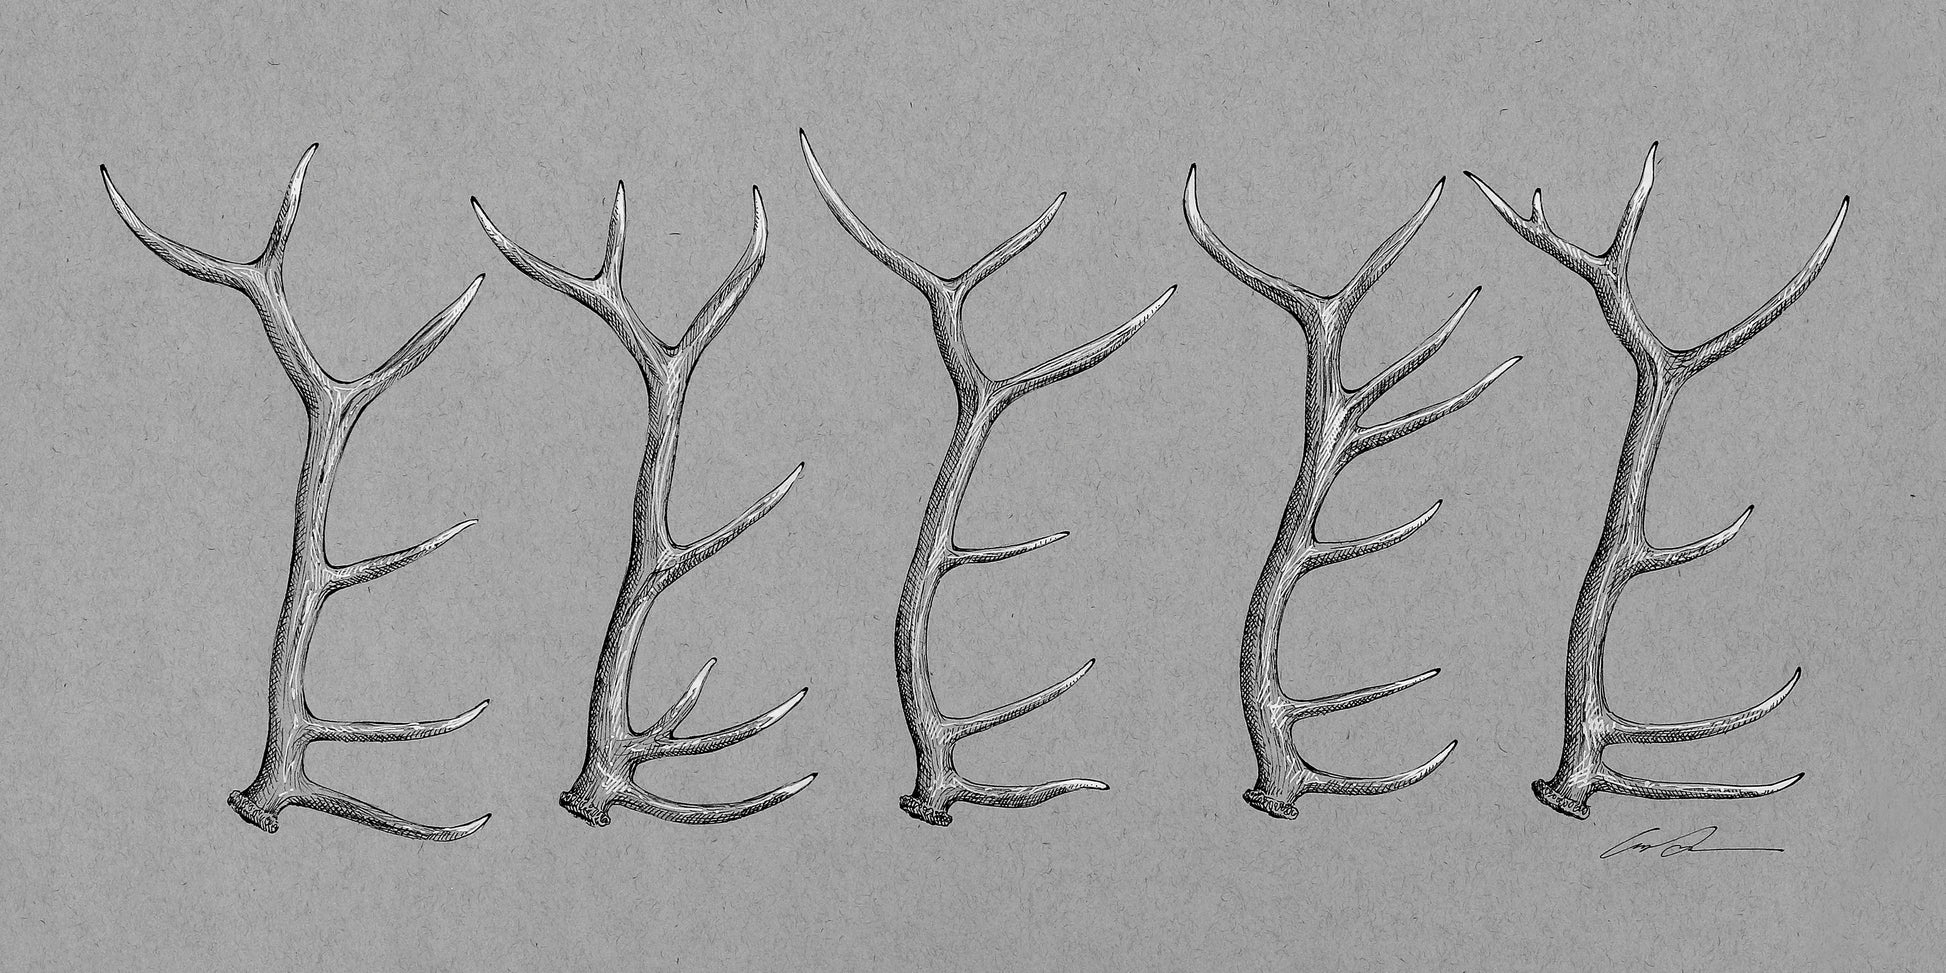 A black and white drawing of of 5 elk antlers on gray paper